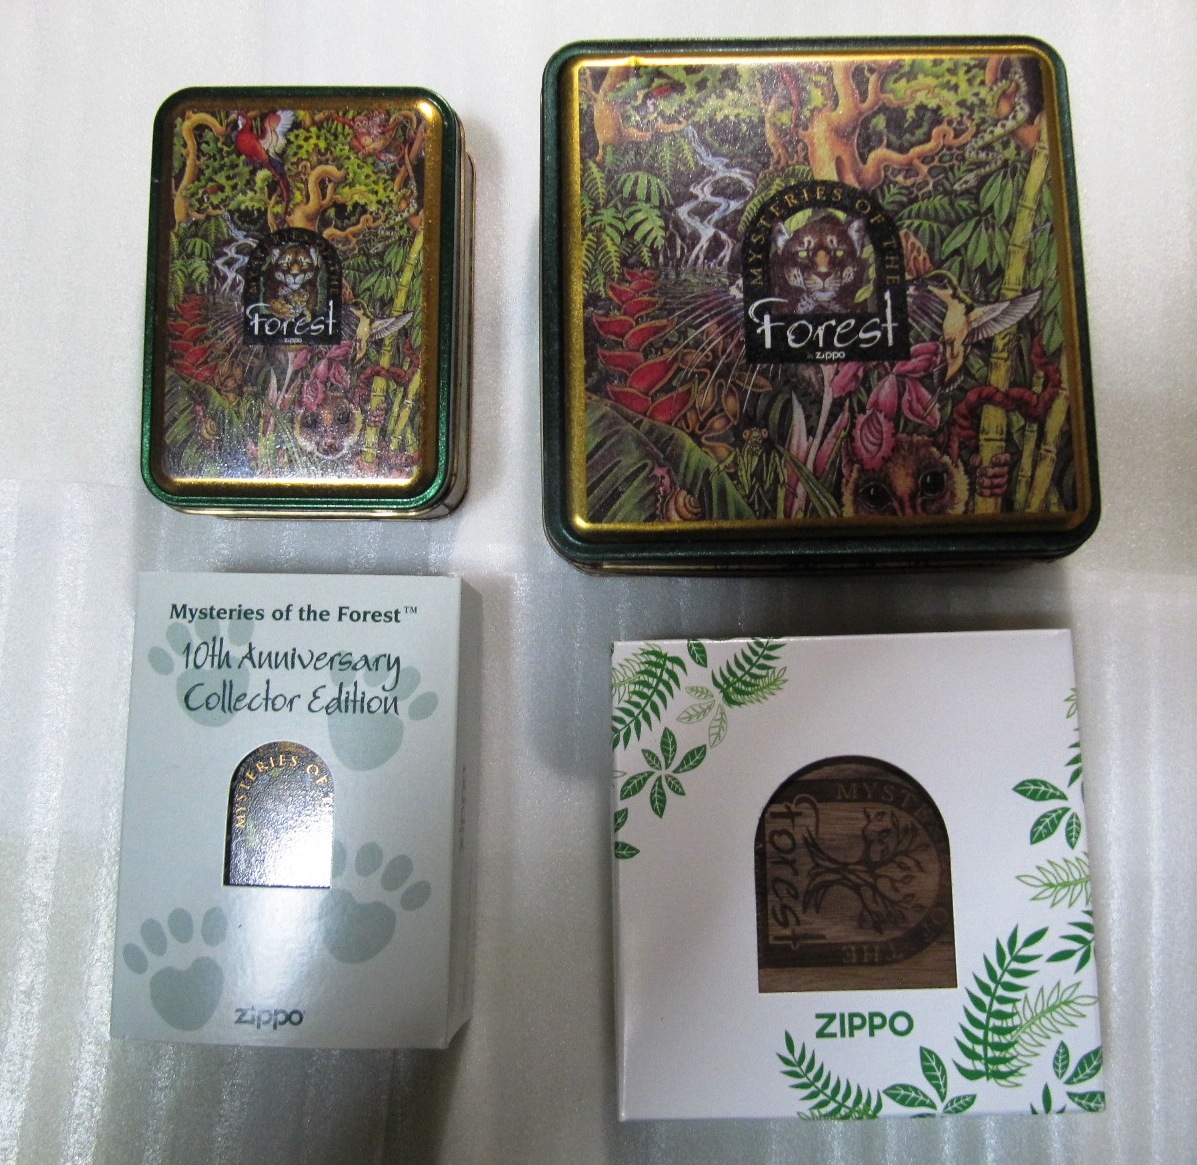 The he Mysteries of the forest 神秘の森計 4セット 1995 2セット -10周年- 25周年記念 ZIPPO